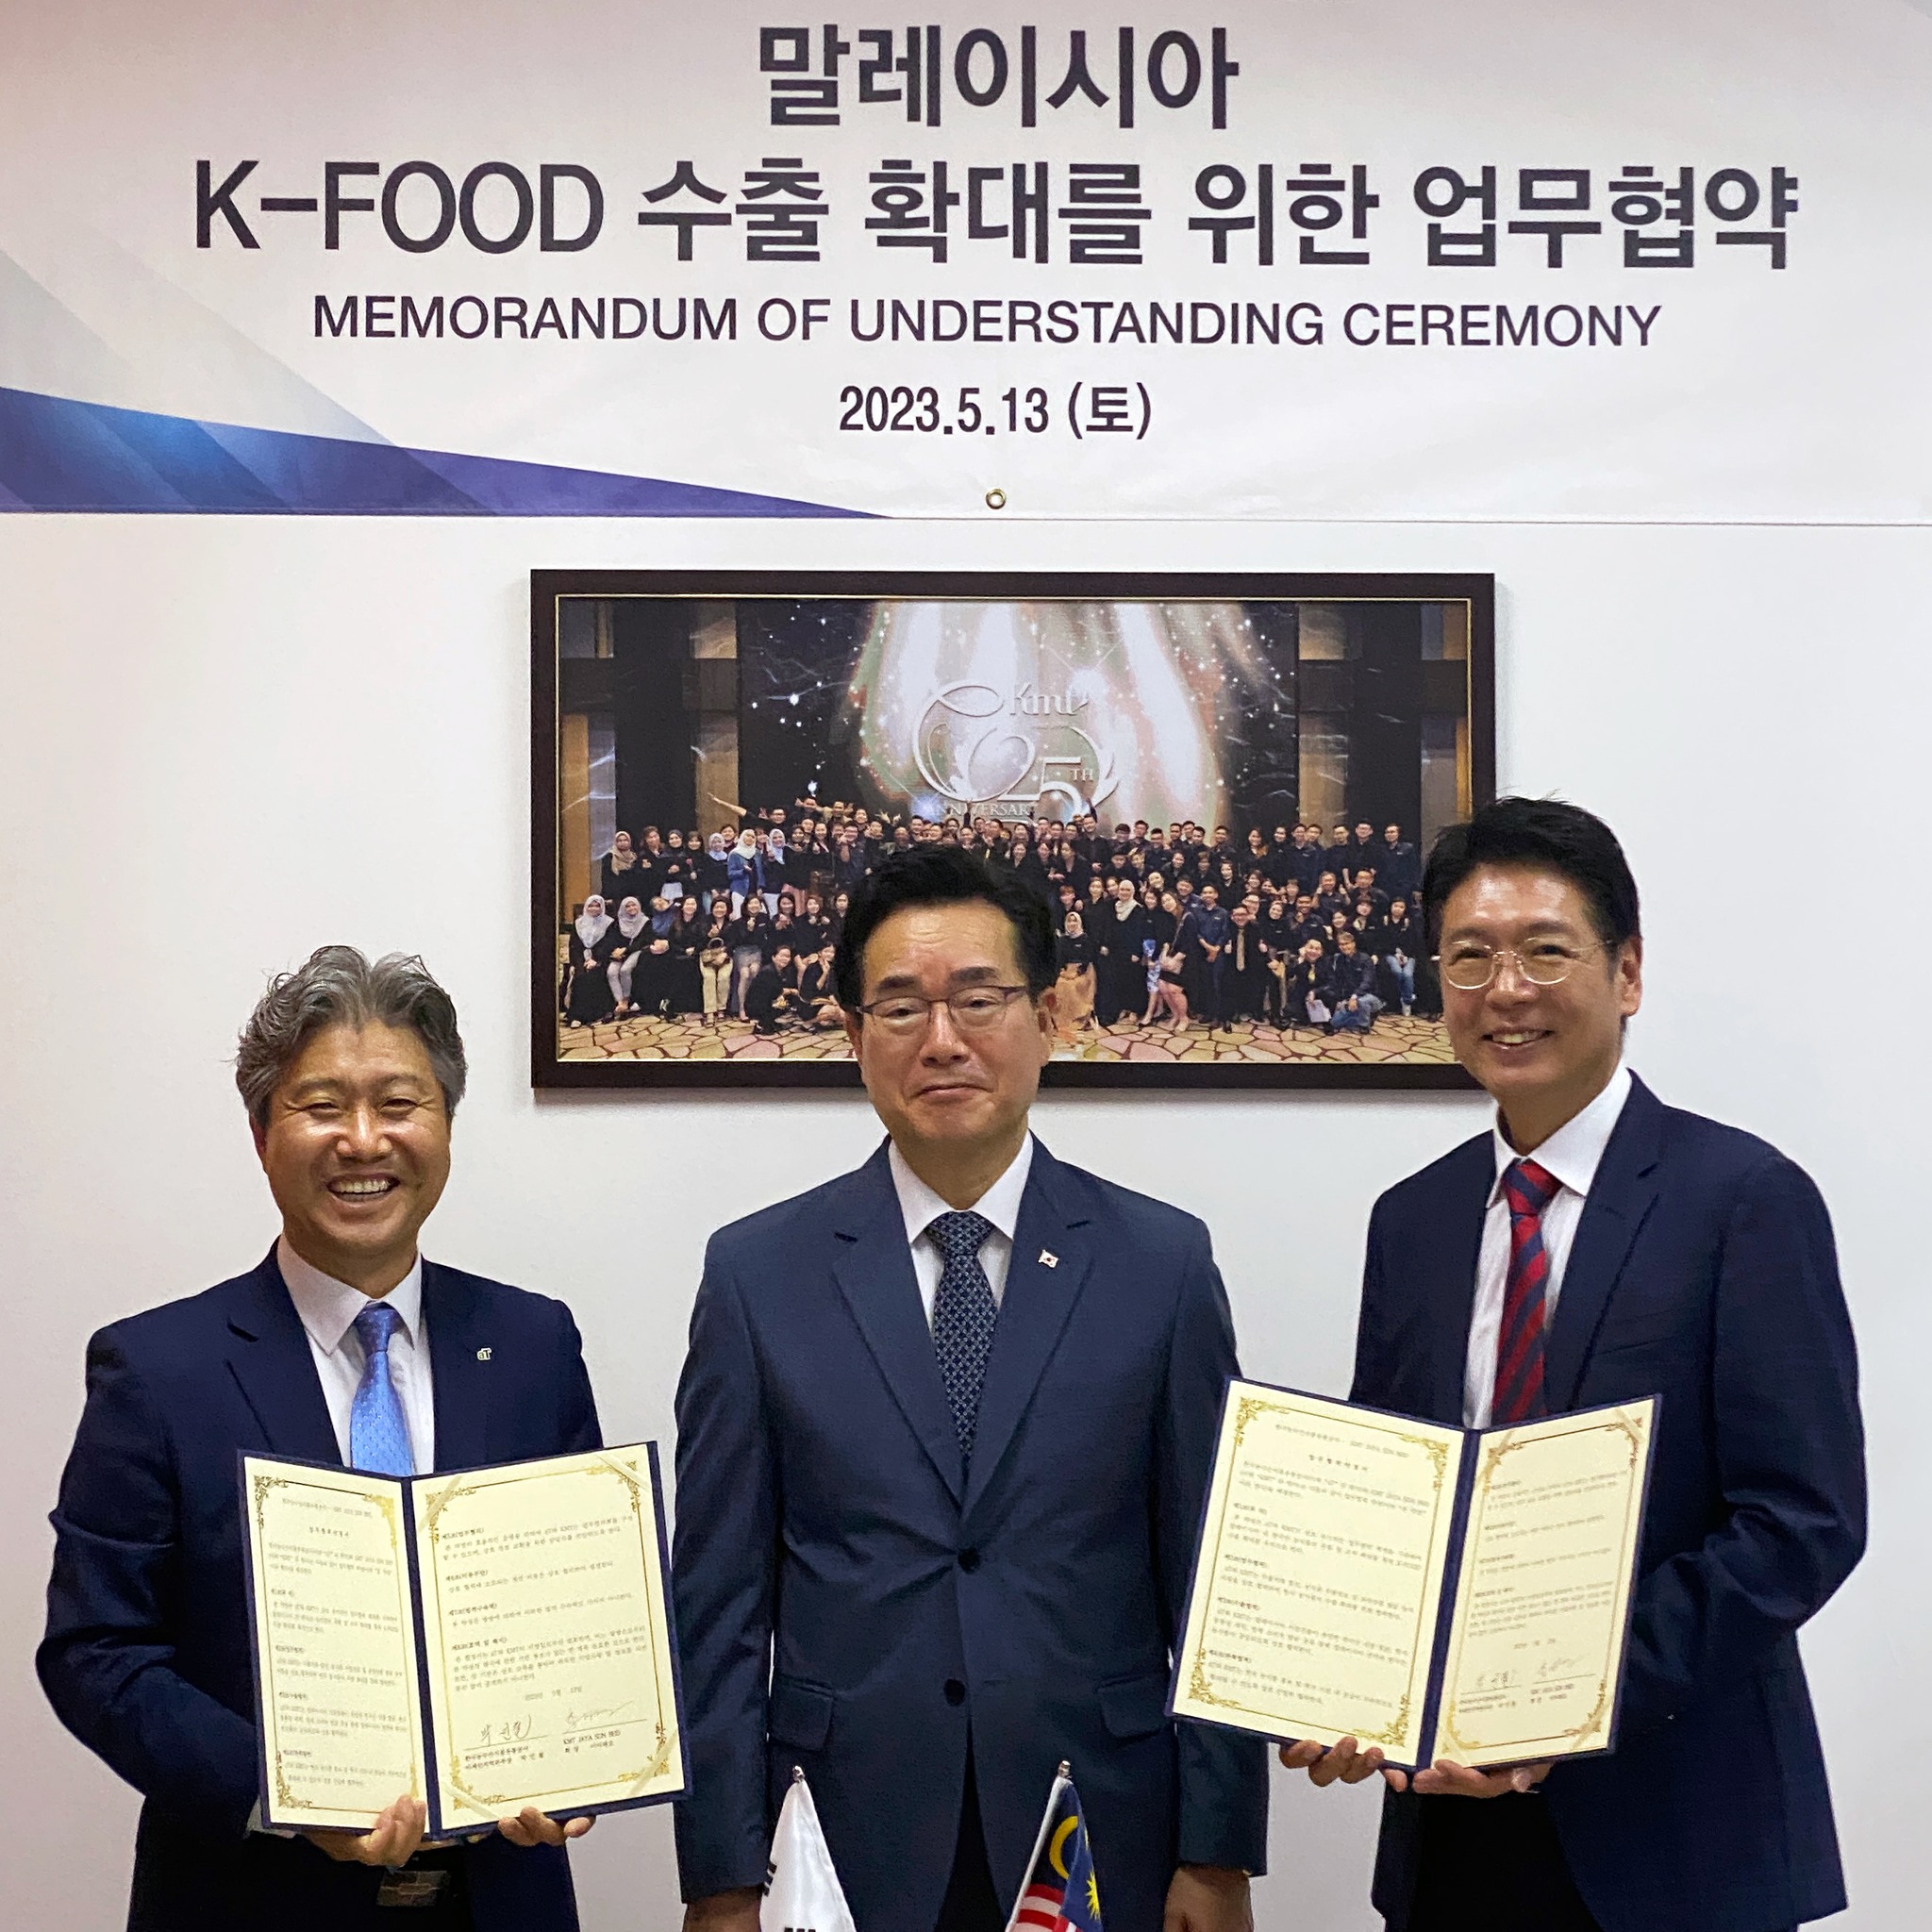 2023 May – MoU Signing with the Minister of Agriculture, Food, and Rural Affairs of the Republic of Korea